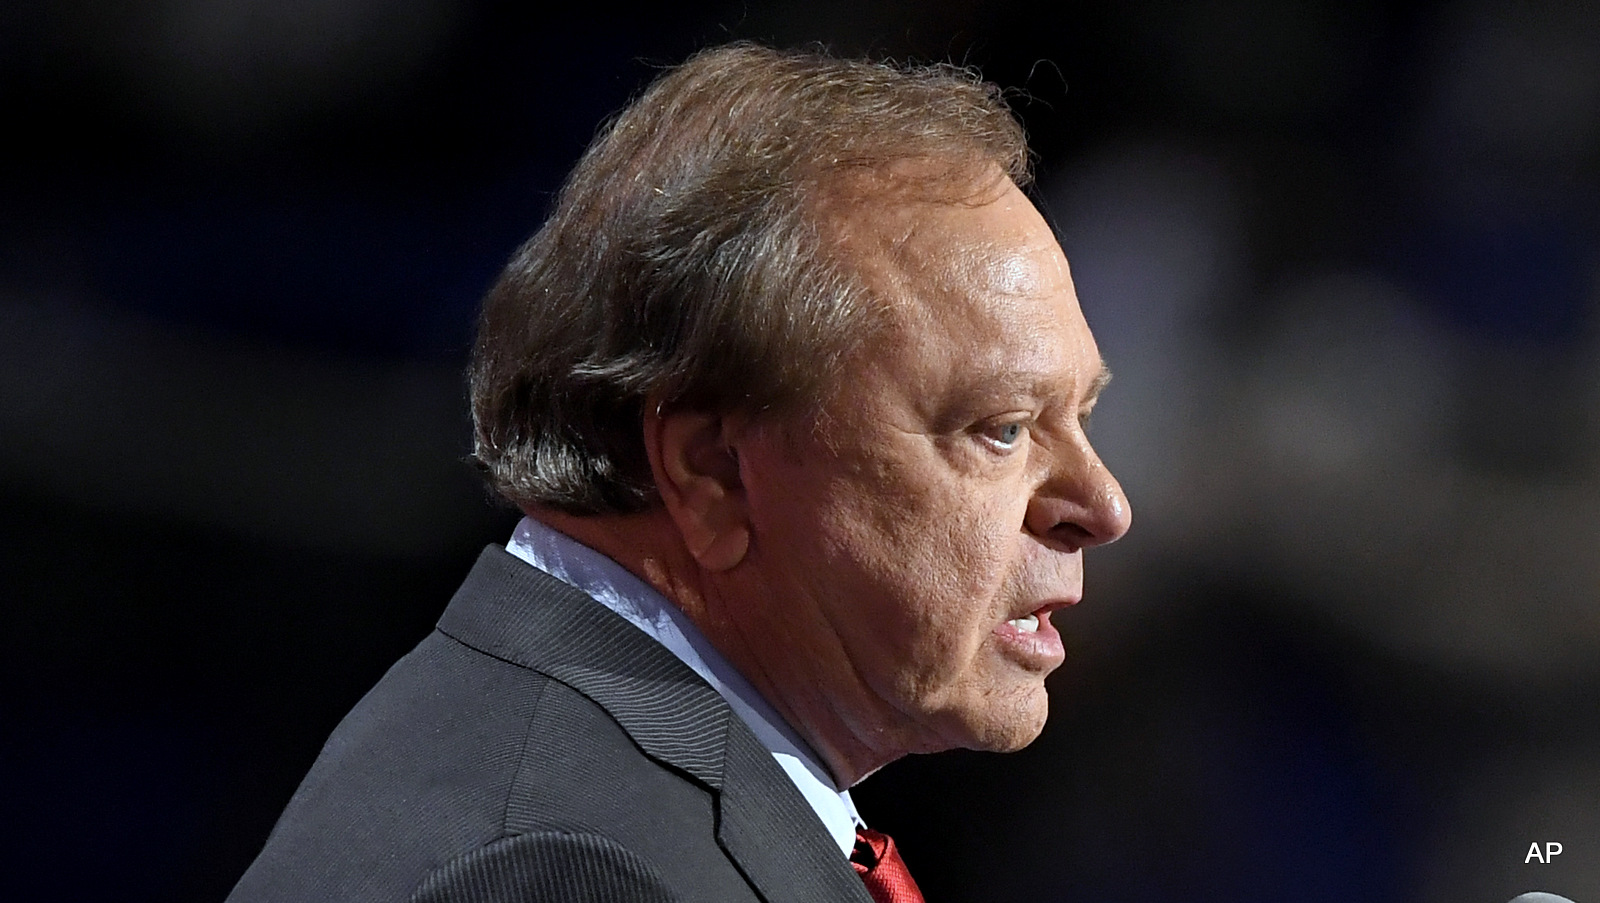 Harold Hamm, CEO of Continental Resources, speaks during the third day of the Republican National Convention in Cleveland, Wednesday, July 20, 2016. (AP Photo/Mark J. Terrill)